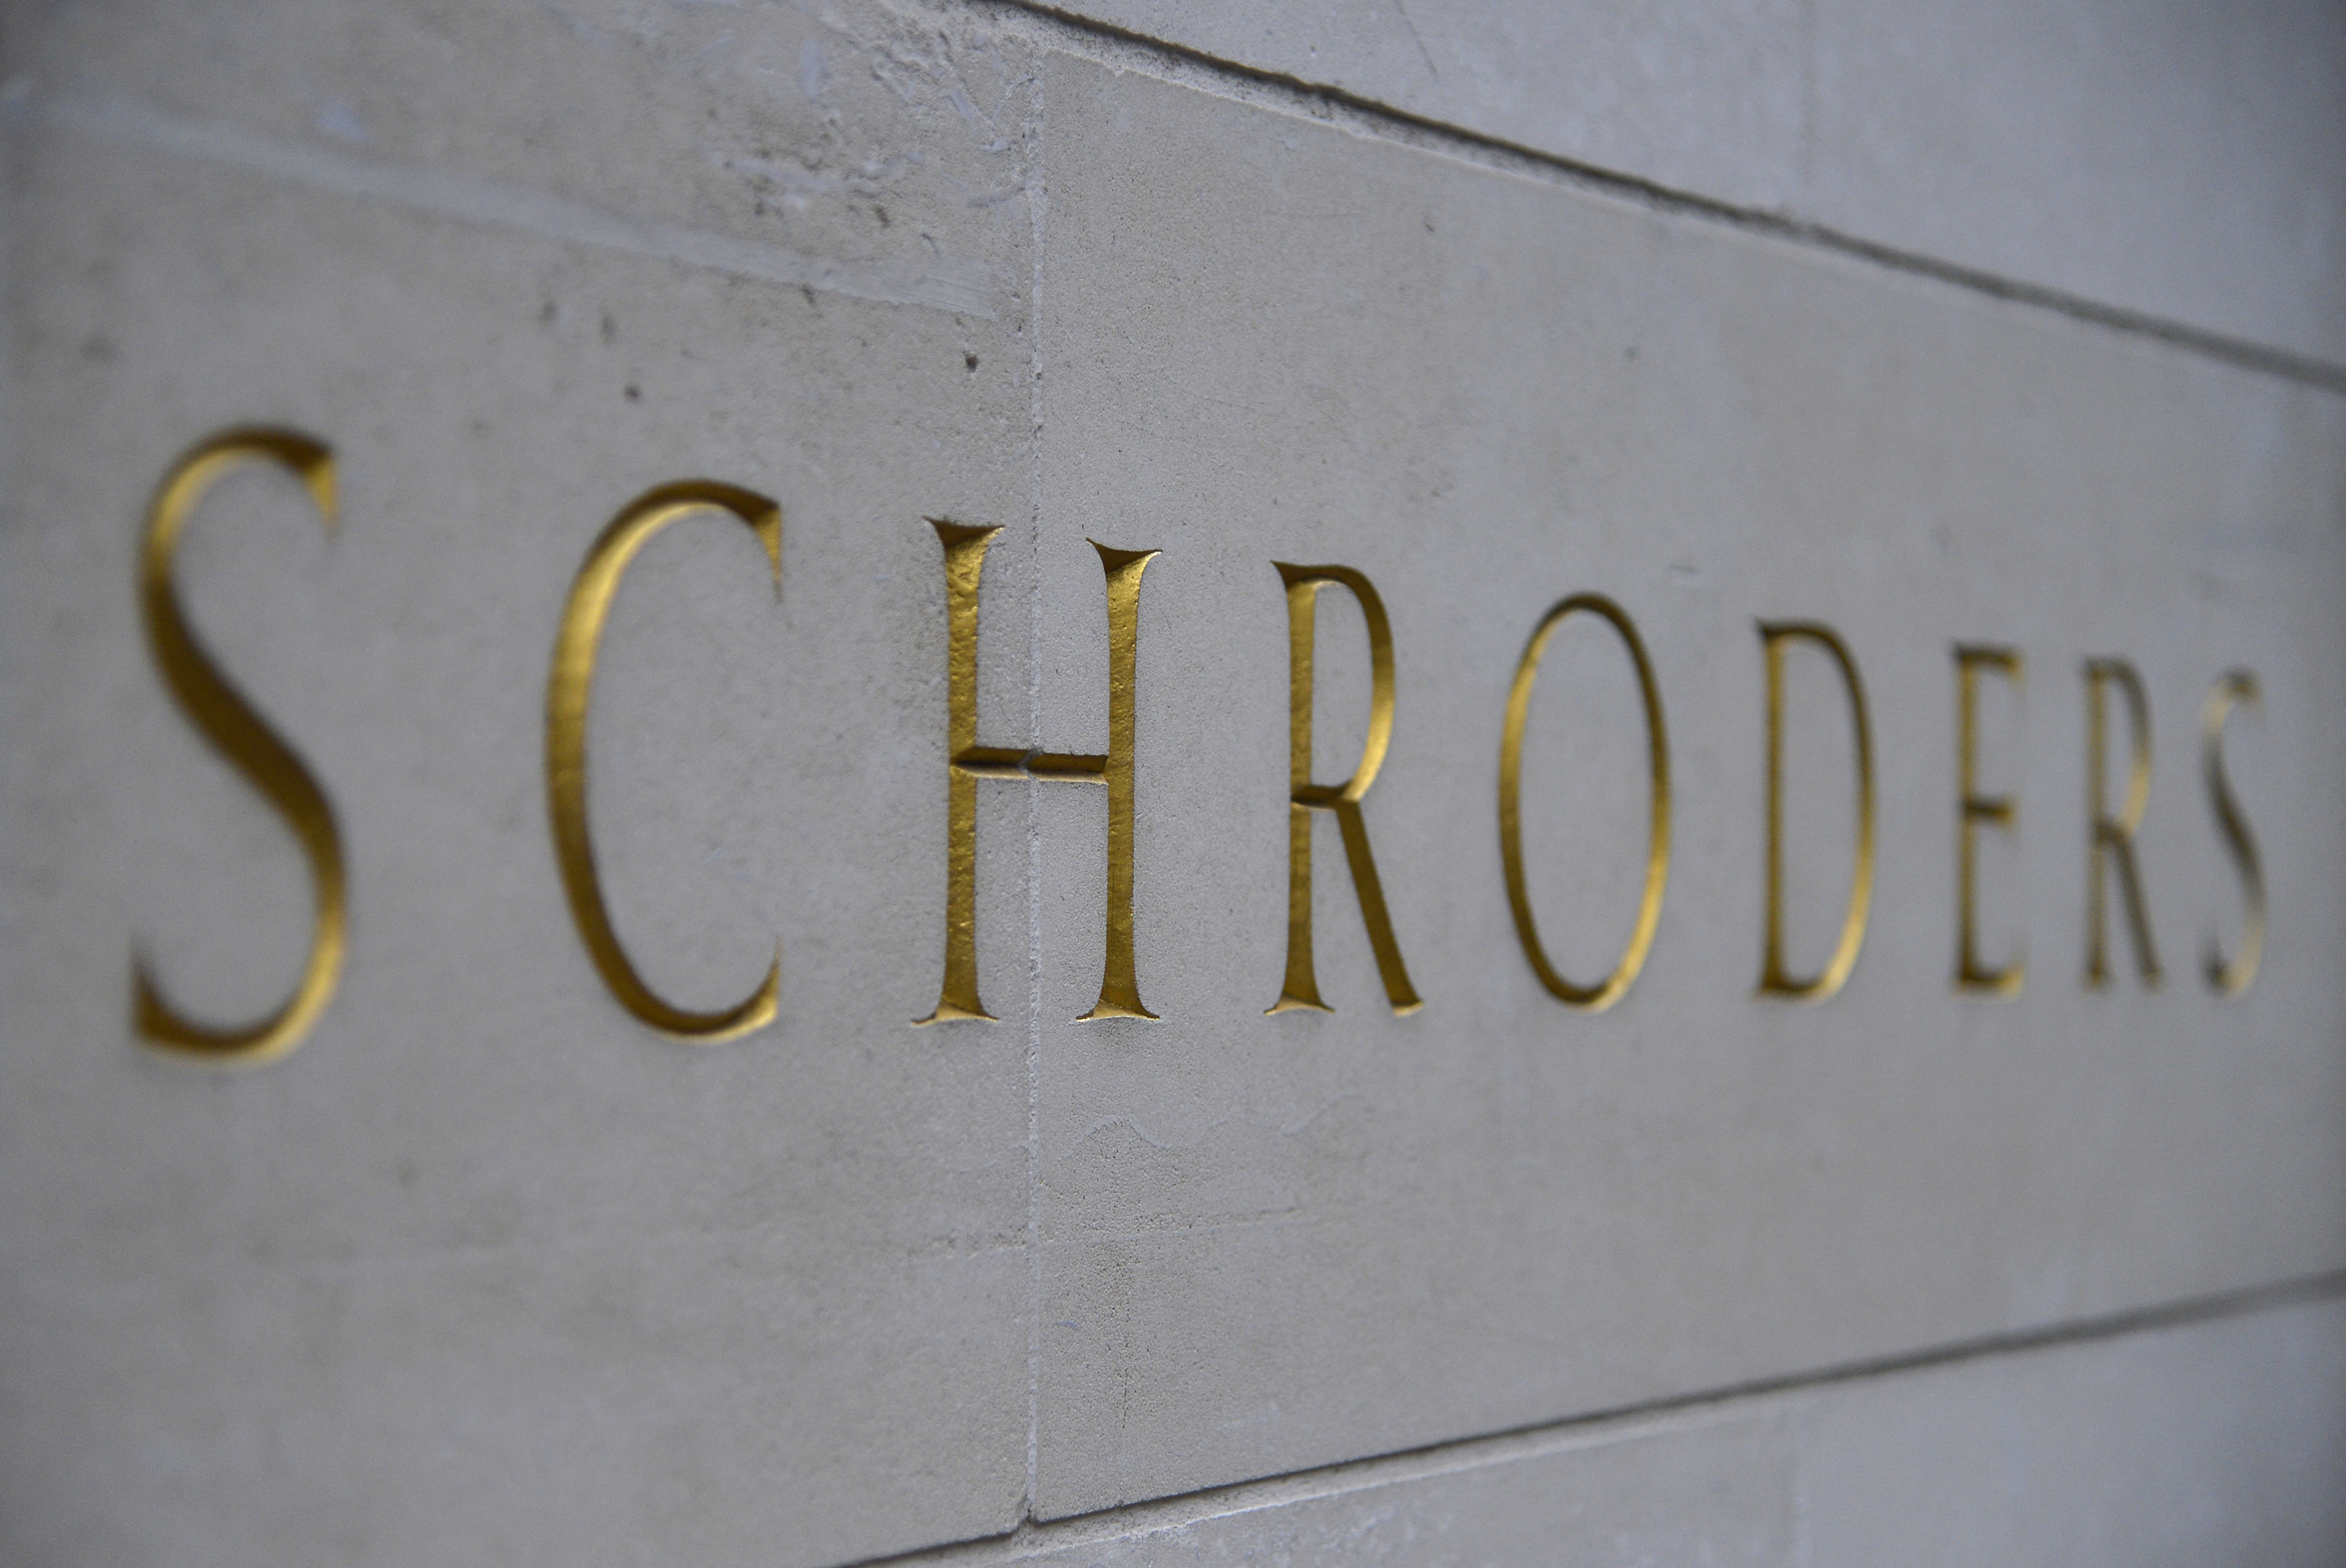 A Schroders sign is seen outside a building in the City of London